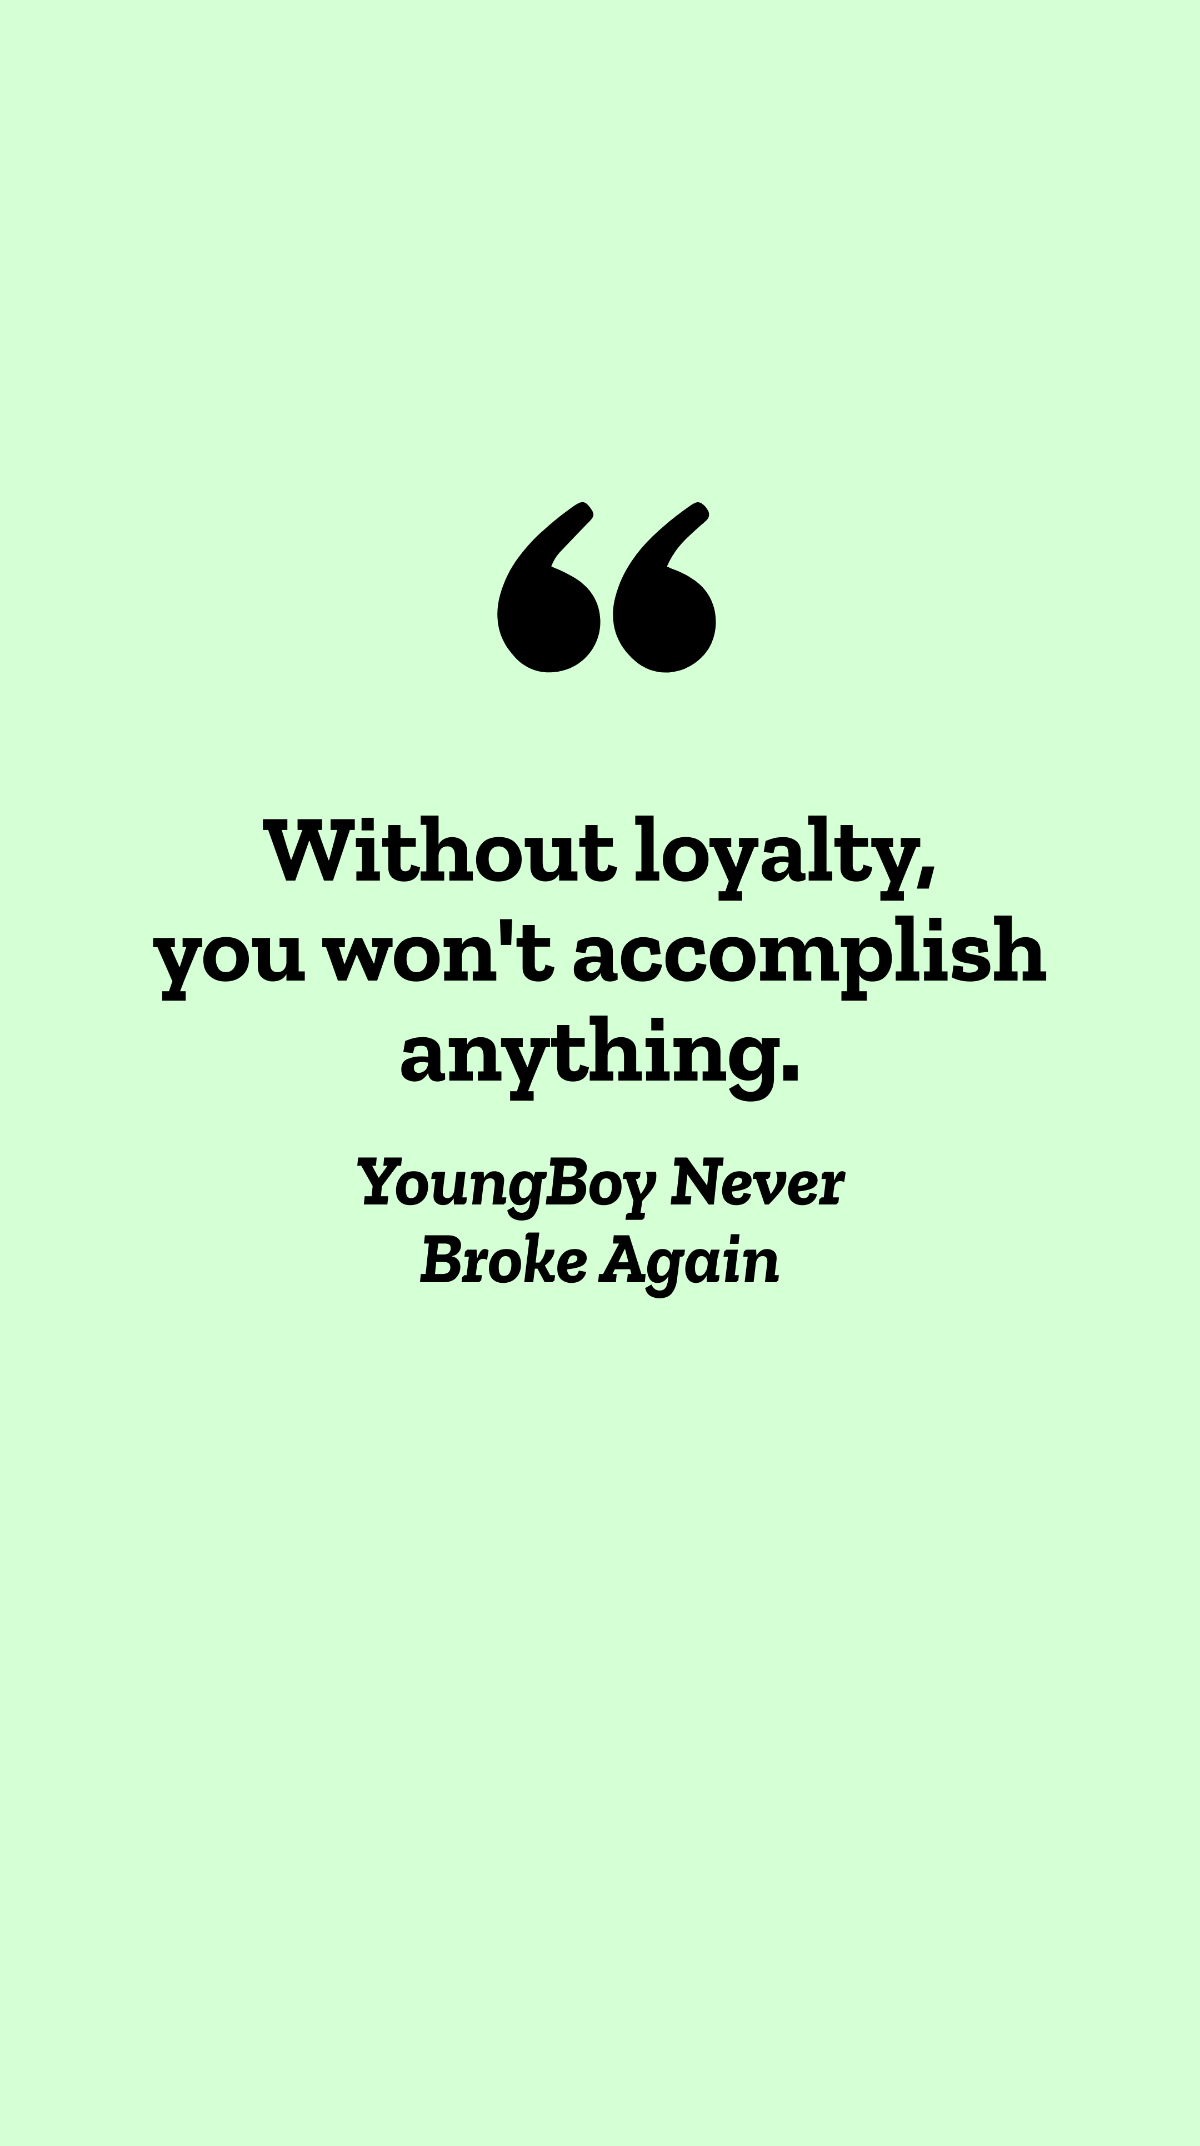 YoungBoy Never Broke Again - Without loyalty, you won't accomplish anything.